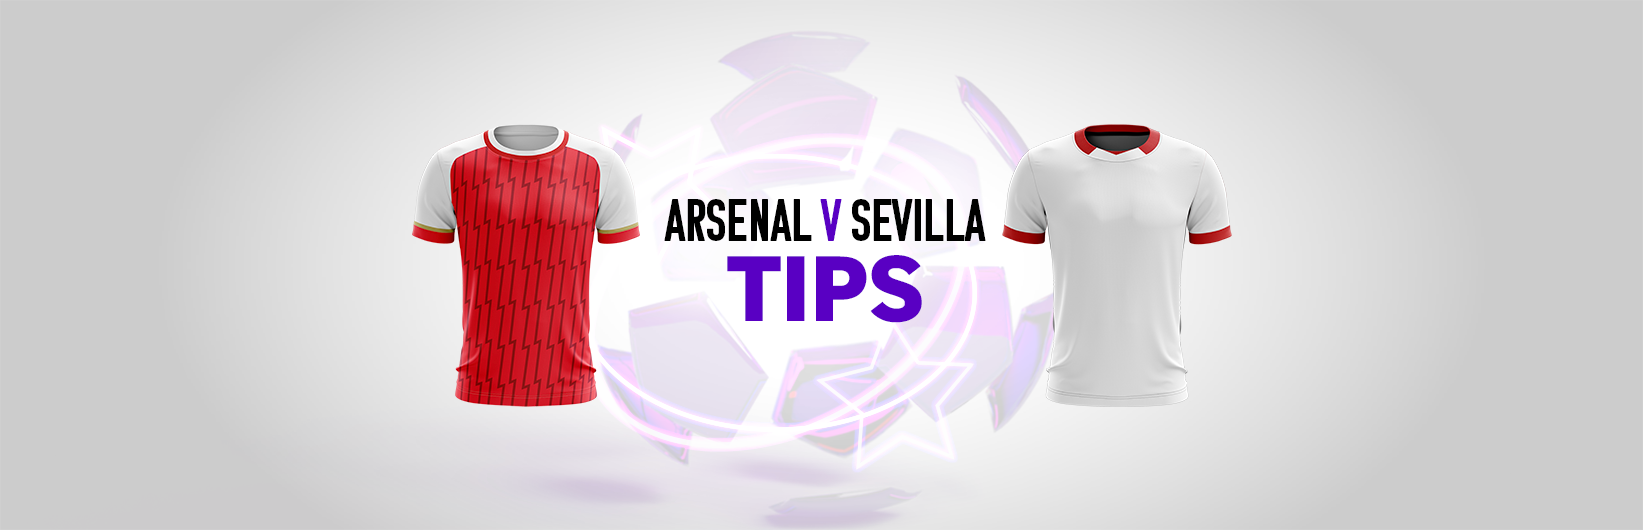 Champions League tips: Best bets for Arsenal v Sevilla